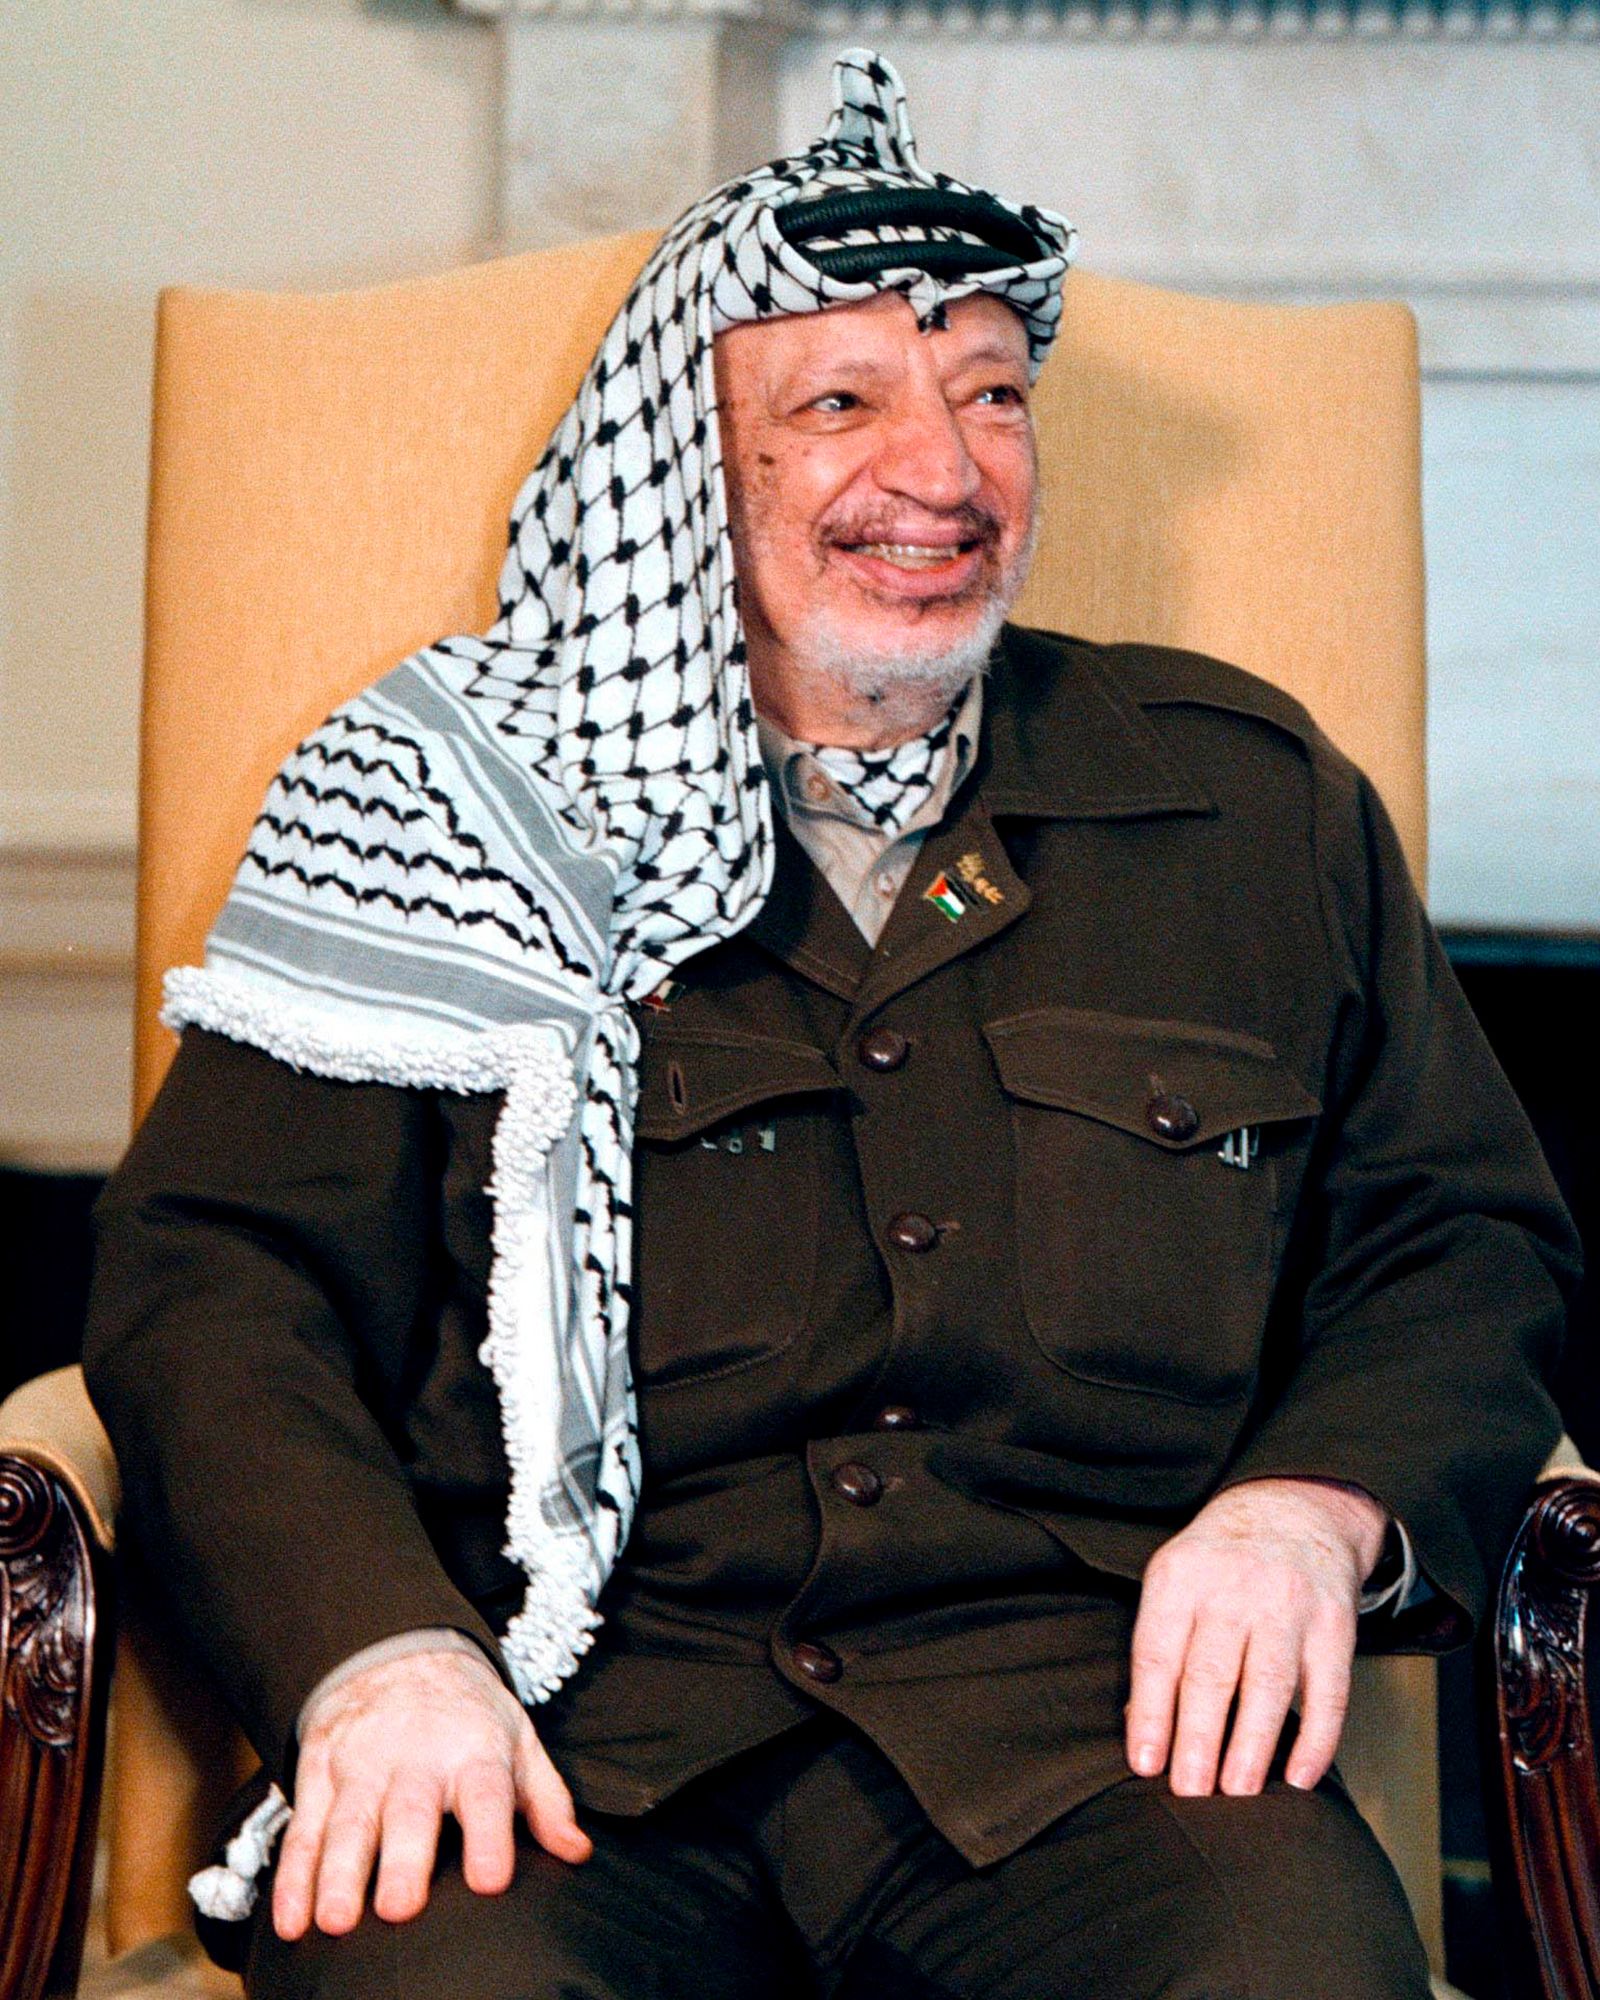 Yasser Arafat, who served as chairman of the Palestinian Liberation Organization and then president of the Palestinian Authority, was rarely seen without a black and white keffiyeh on his head and draped over one shoulder.